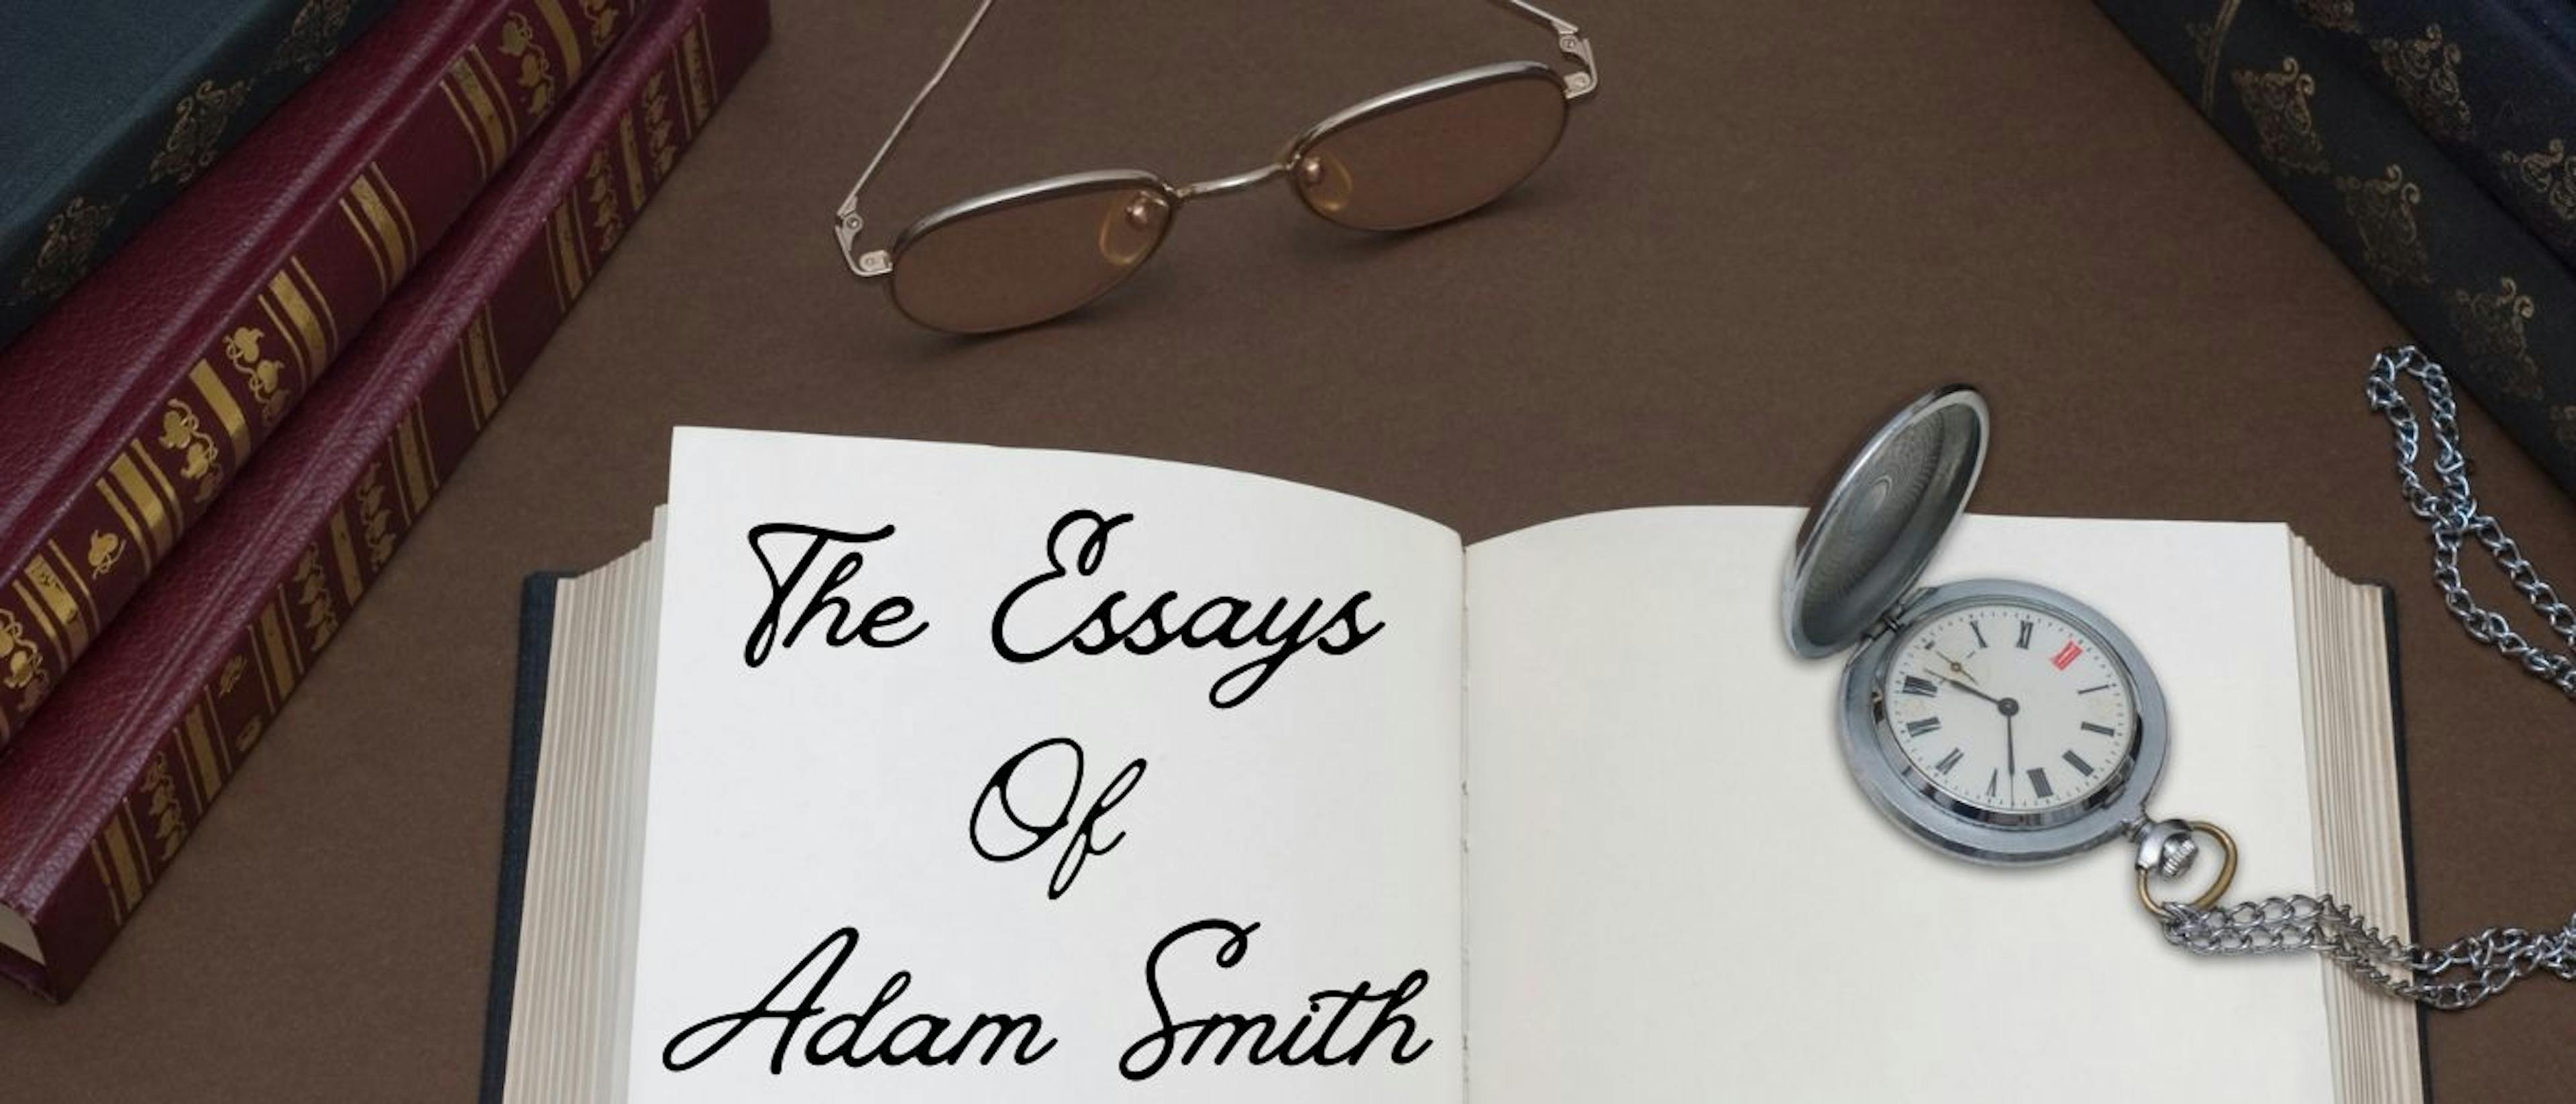 featured image - The Essays of Adam Smith: Part III, Chapter I